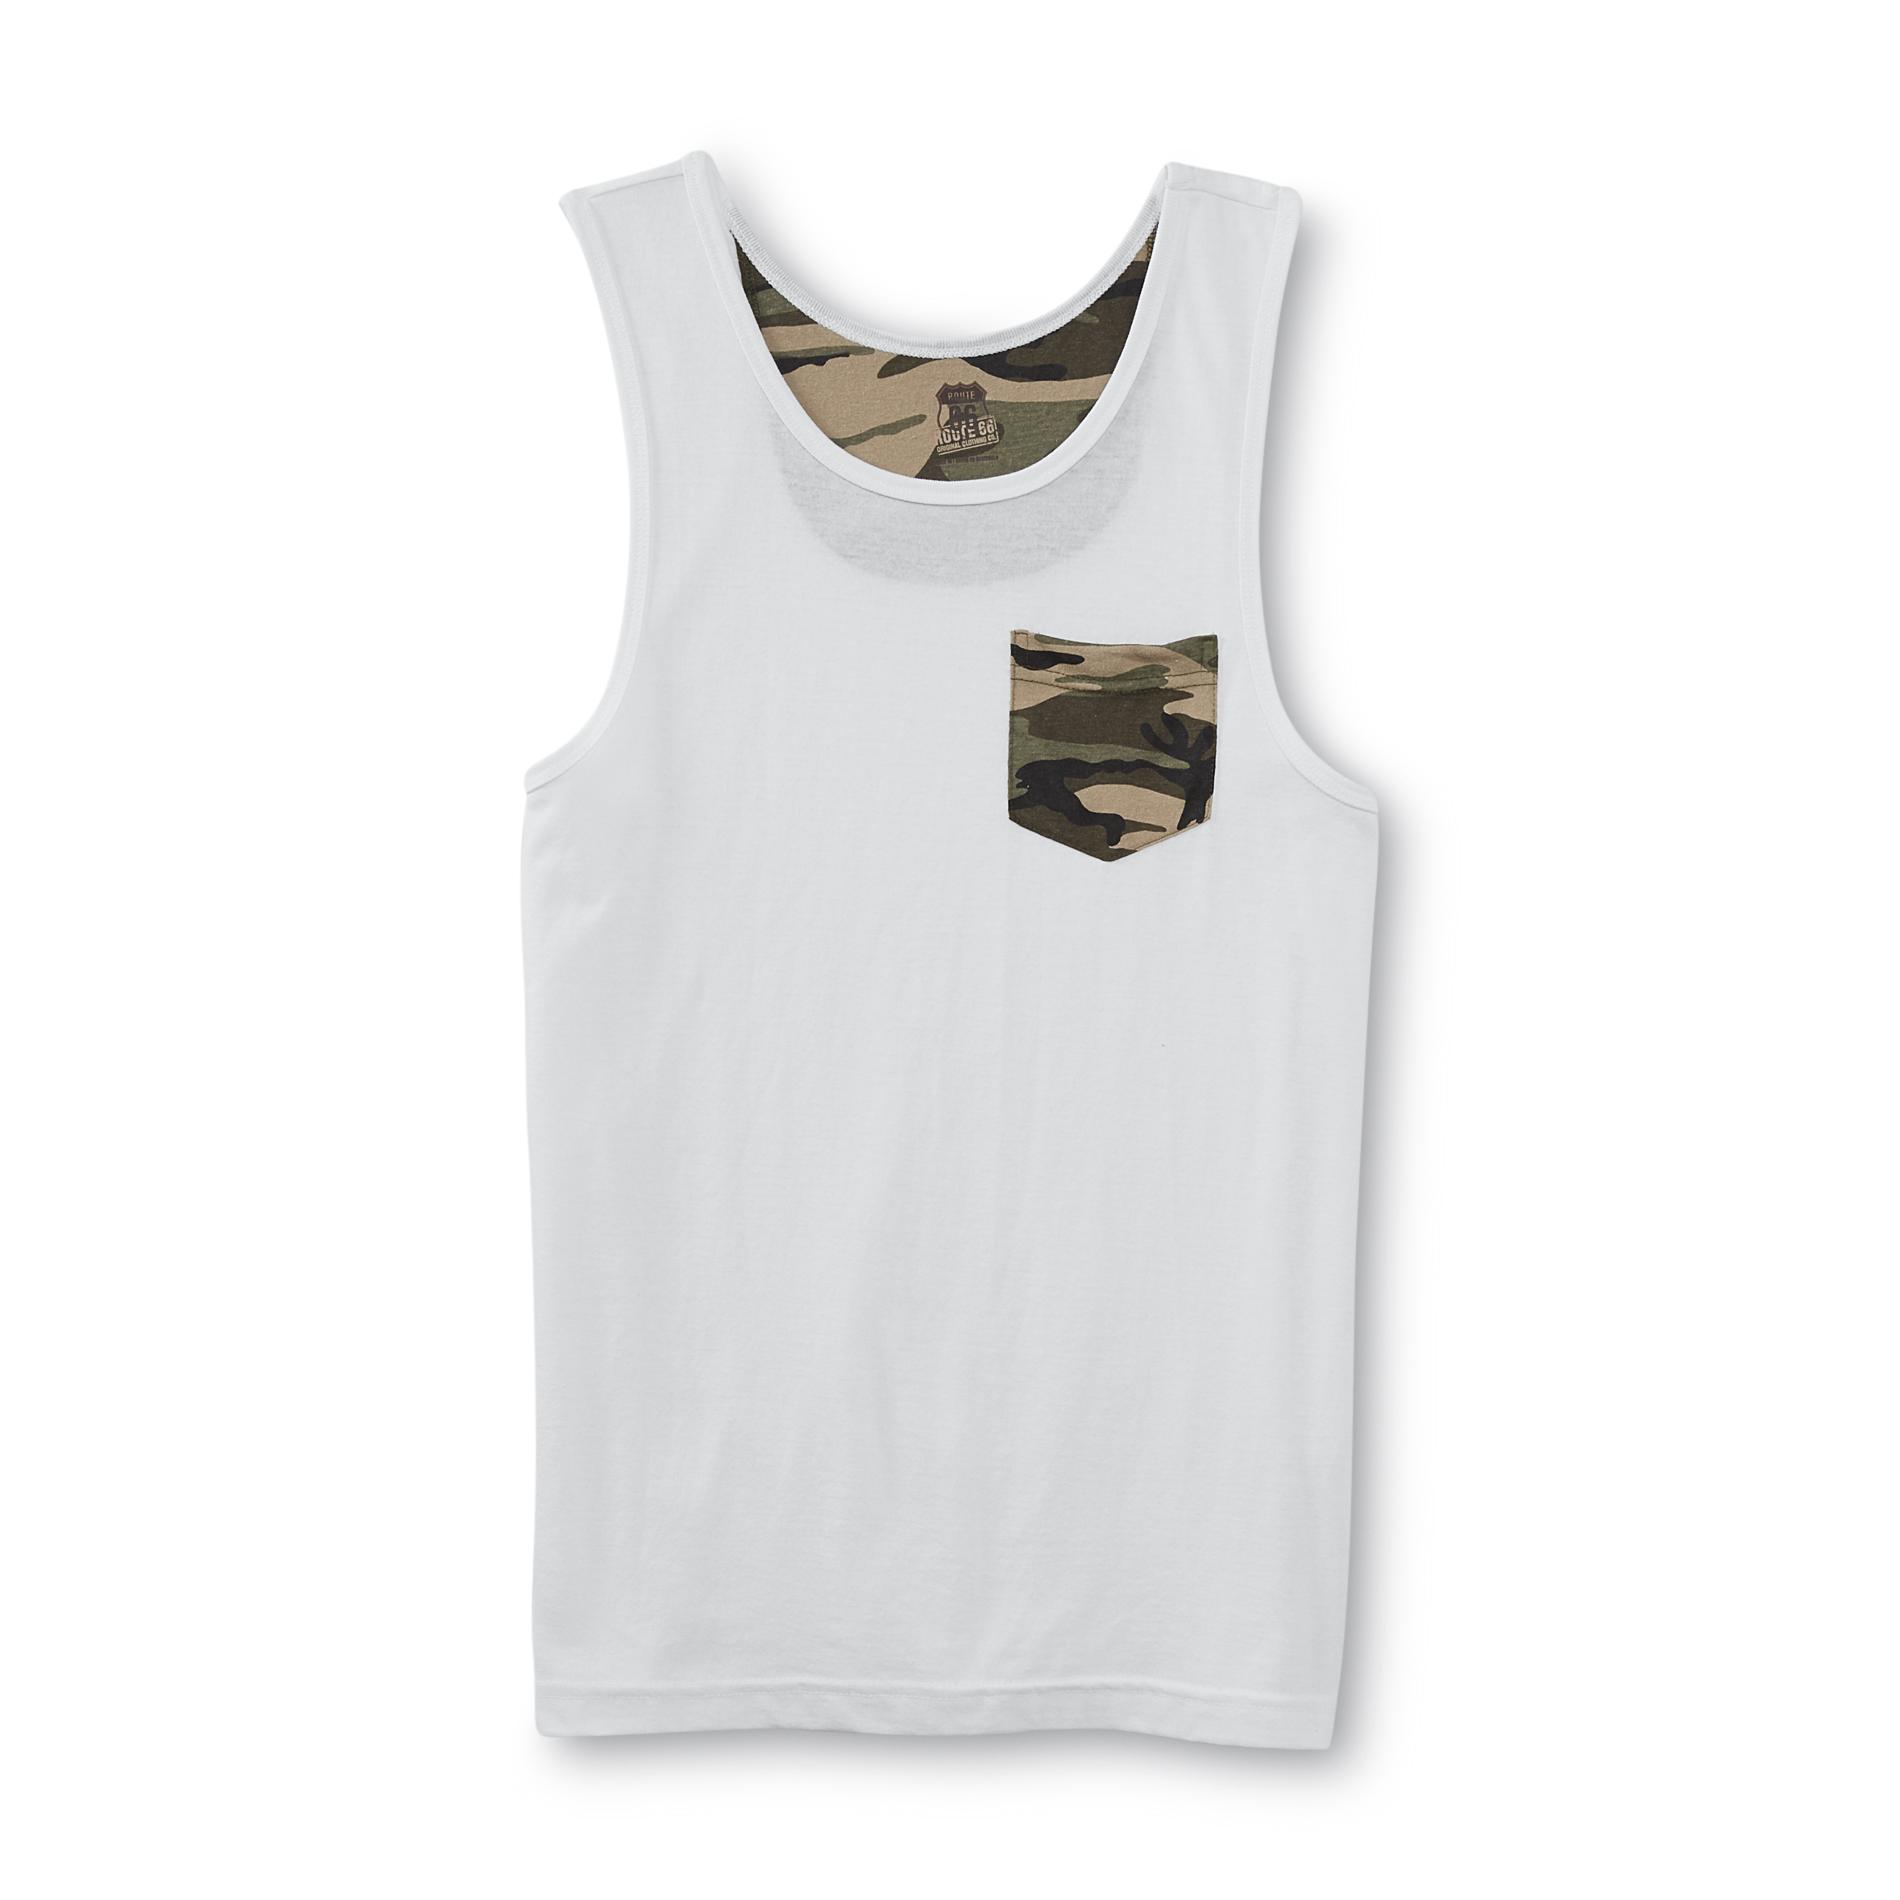 Route 66 Men's Tank Top - Camouflage